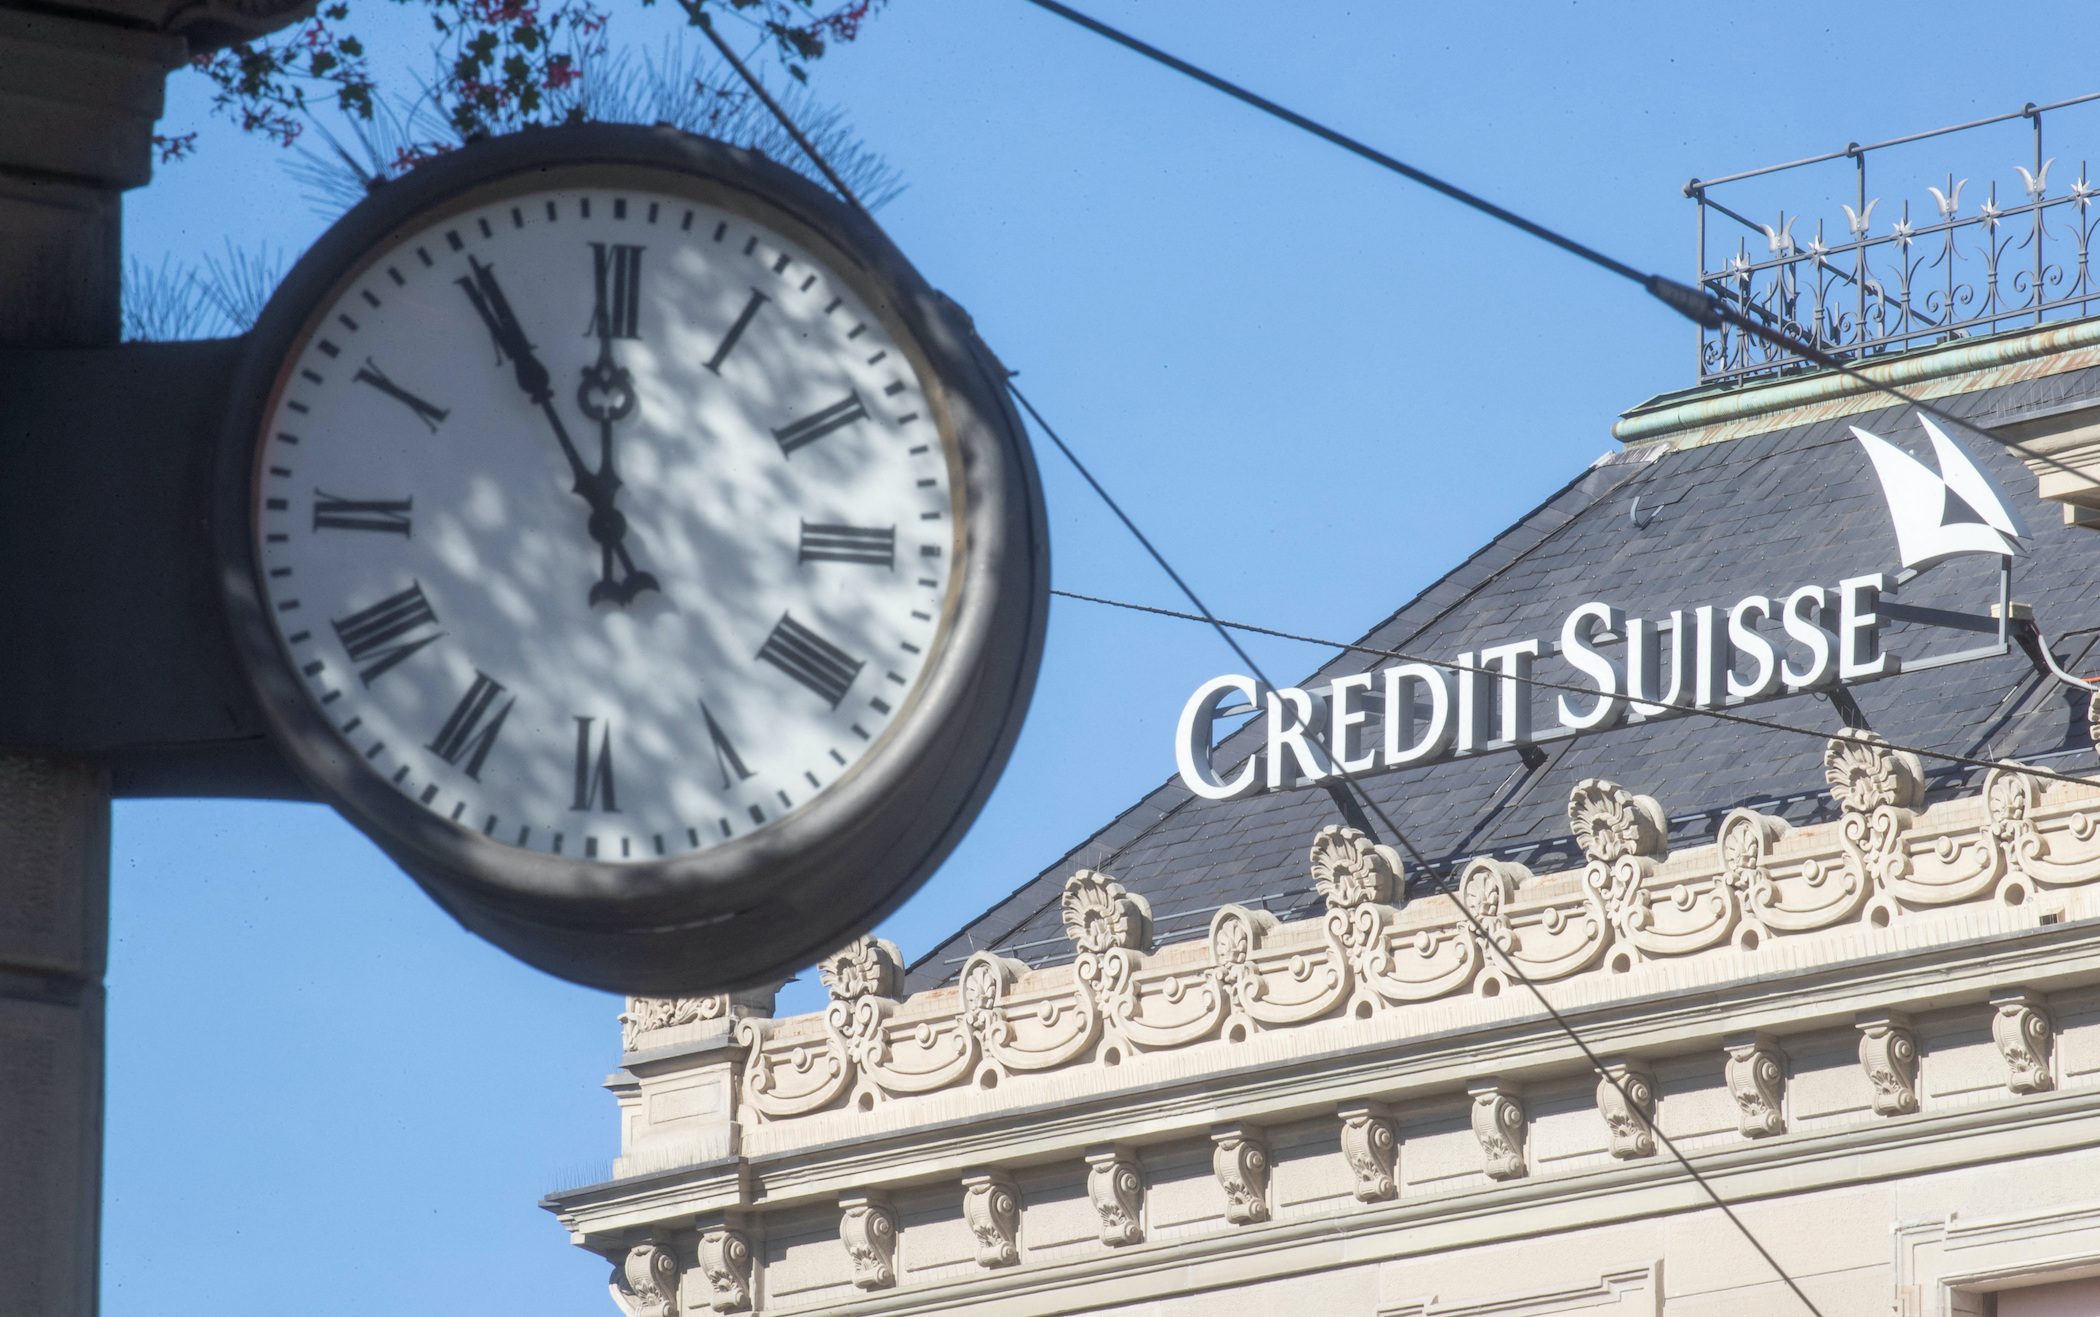 Credit Suisse’s turnaround just got a lot tougher as market reels